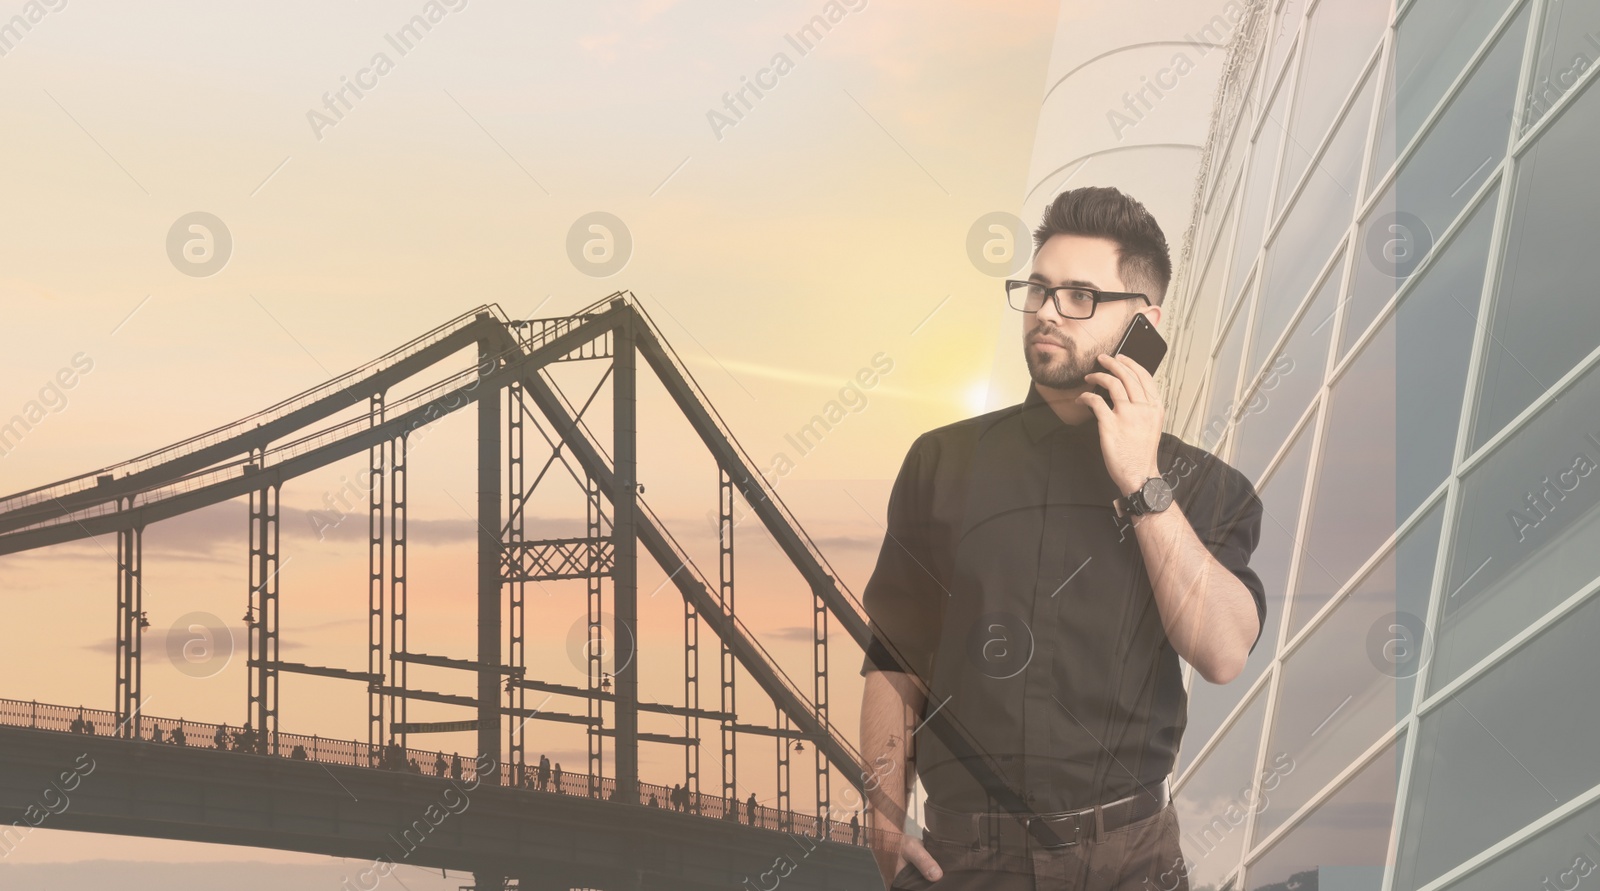 Image of Multiple exposure of businessman with smartphone and cityscape